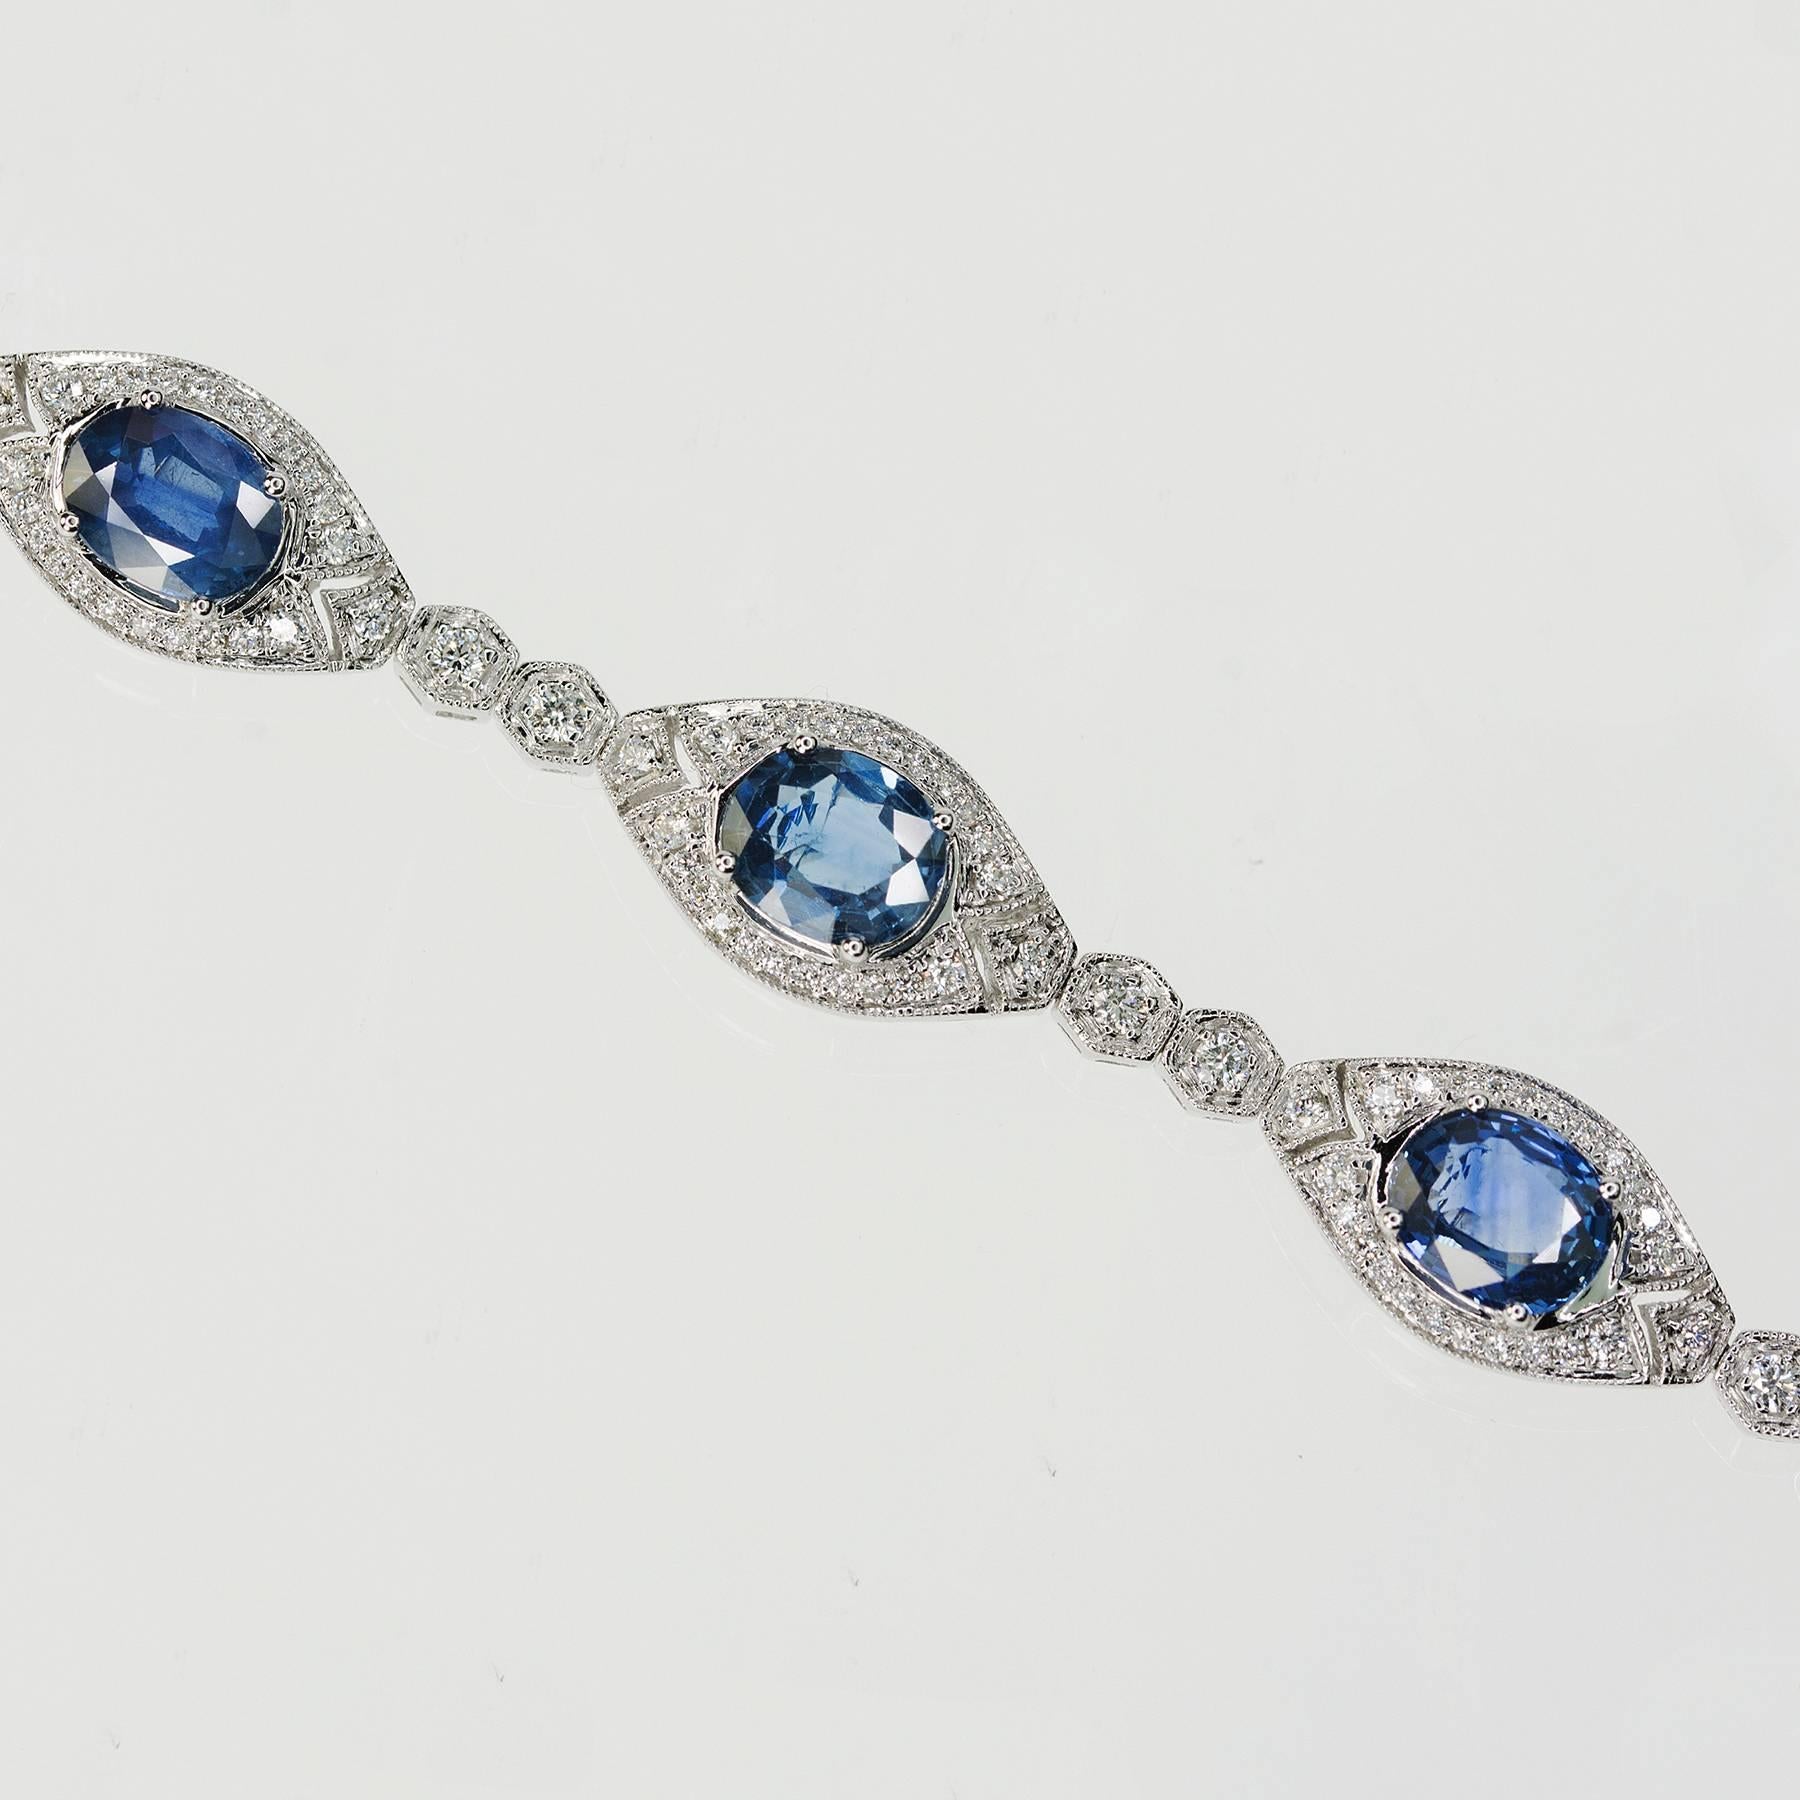 18k White Gold Bracelet with 7 oval sapphires weighing 11.13 carats and round brilliant diamonds weighing 1.51 carats. 7